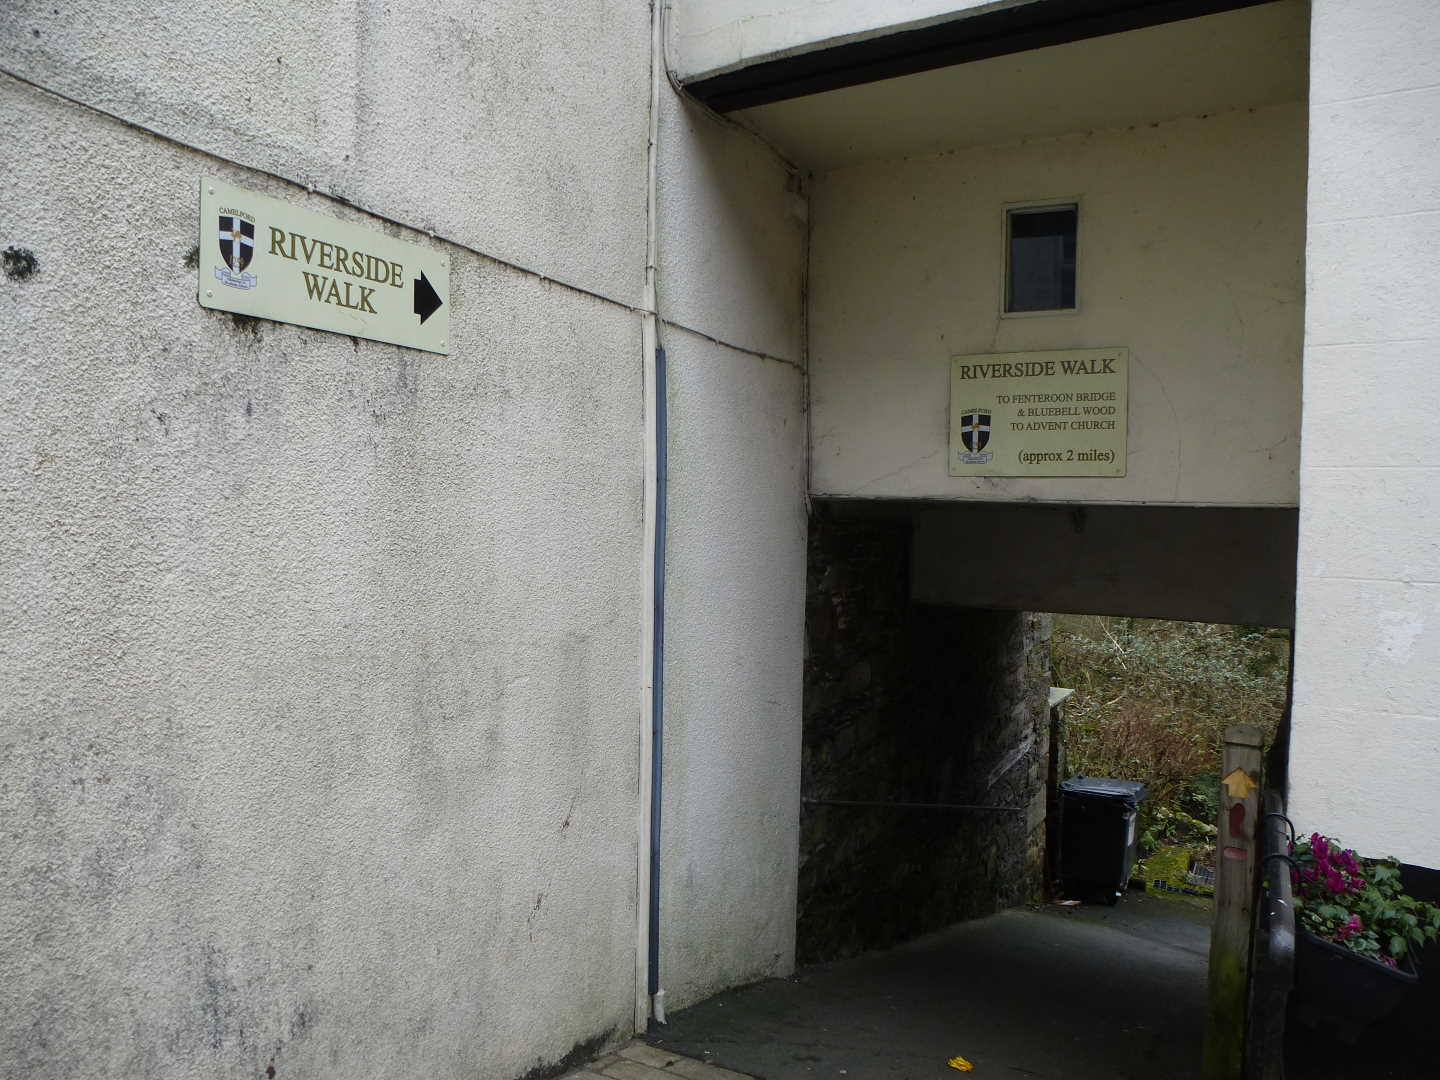 A walkway with a sign showing the directions to the walk